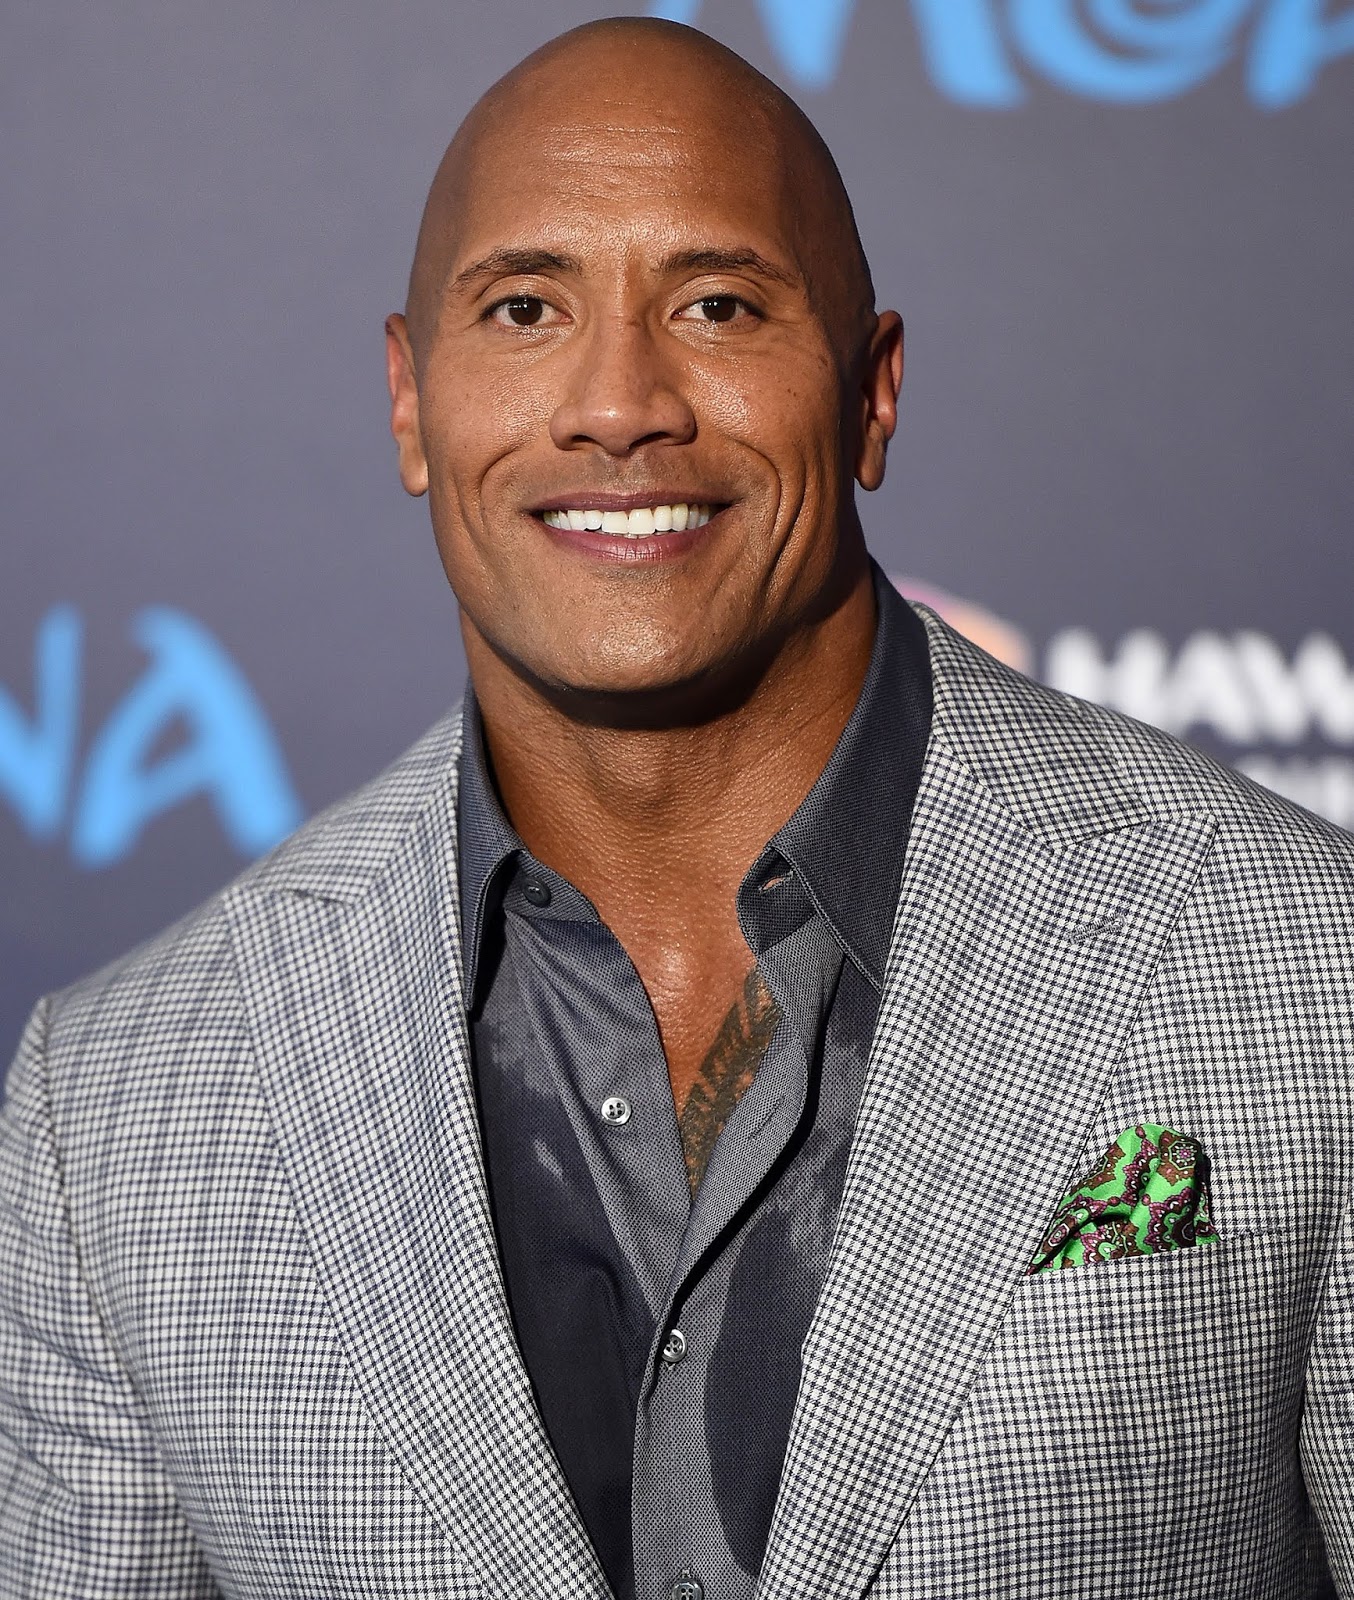 Top 99+ Pictures Images Of Dwayne Johnson Updated